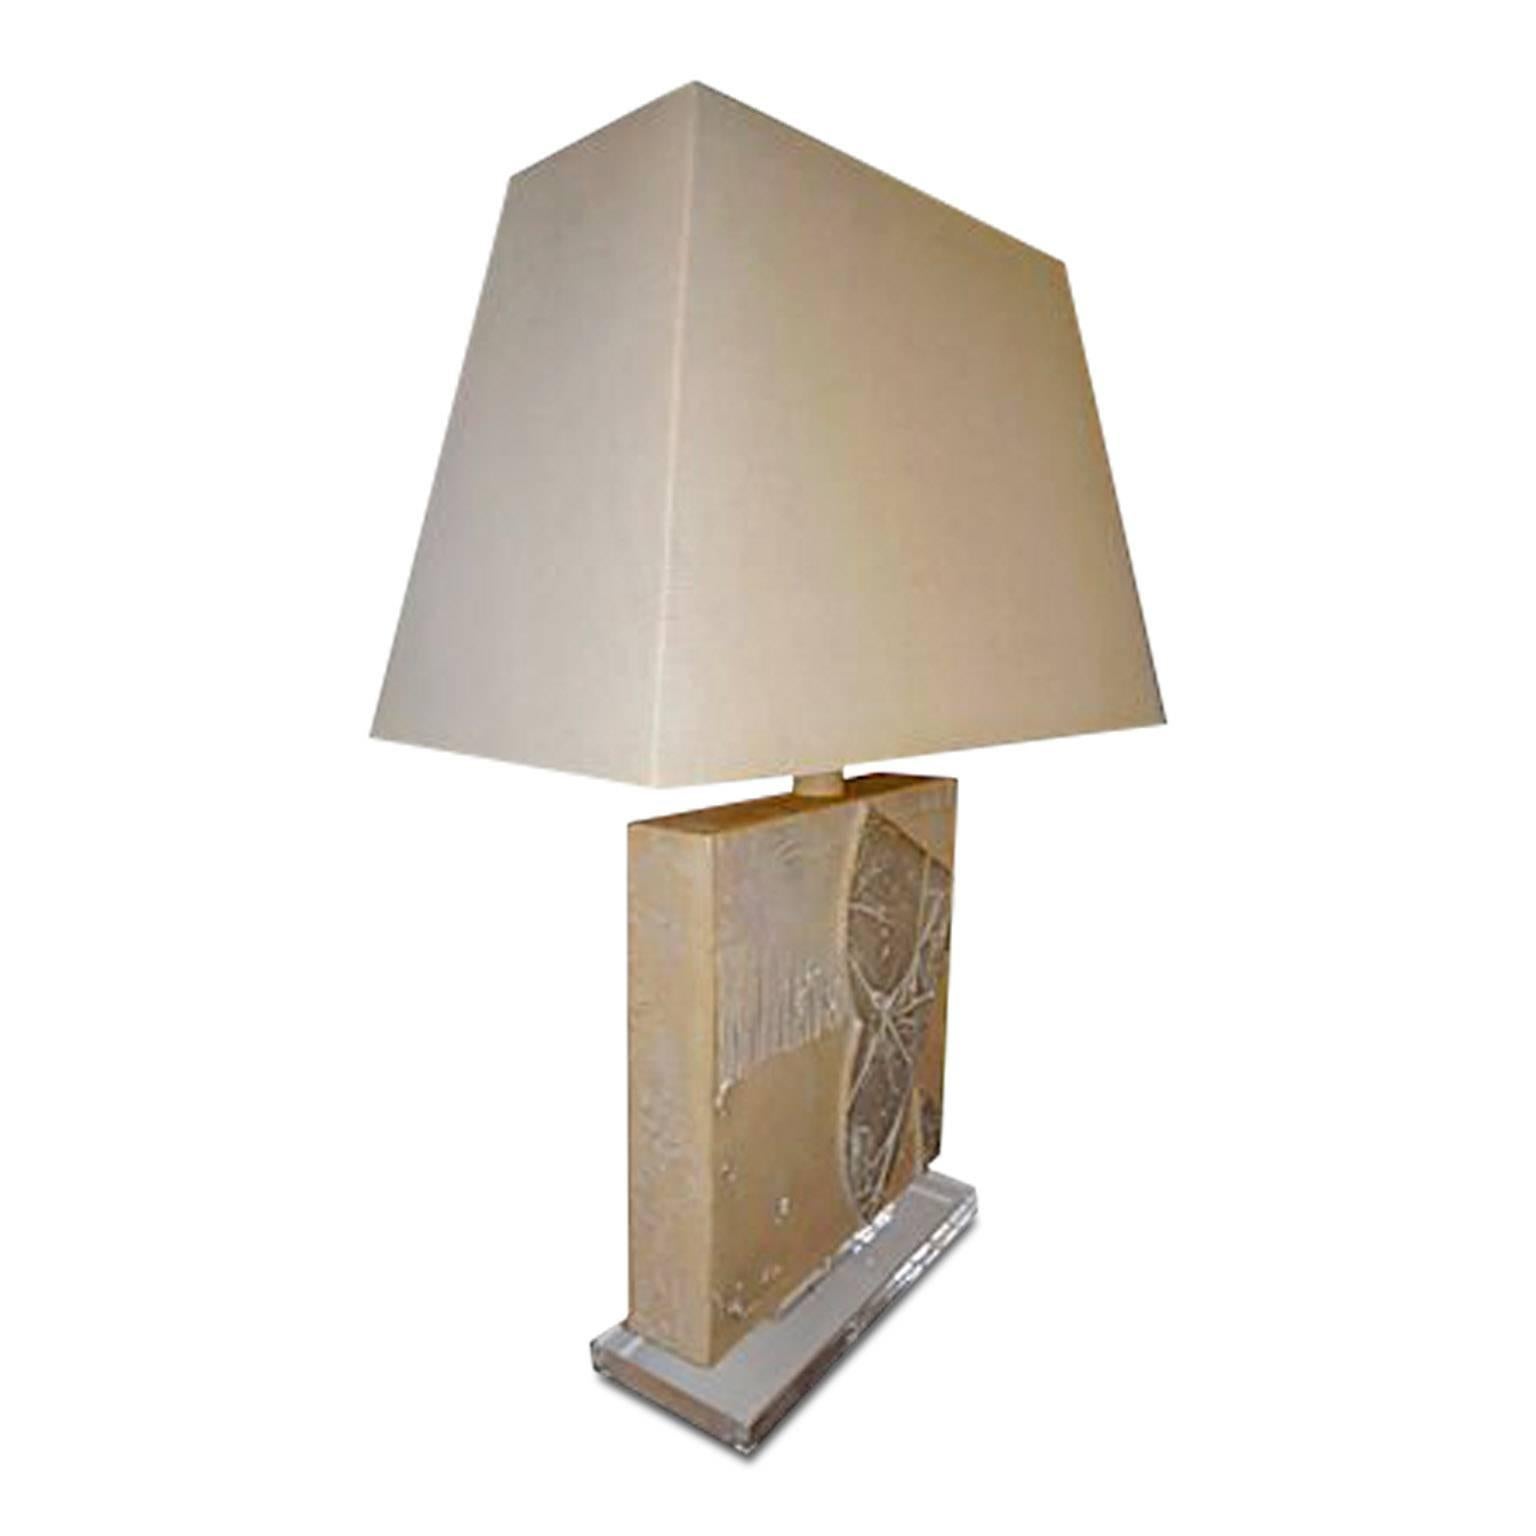 Mid-Century Modern table lamp decorated to give the appearance of carved engraved clay slabs atop of a Lucite base which are contrastive on the front and back. The simple, clean shape its calm, neutral colors would work with a number of interiors. A